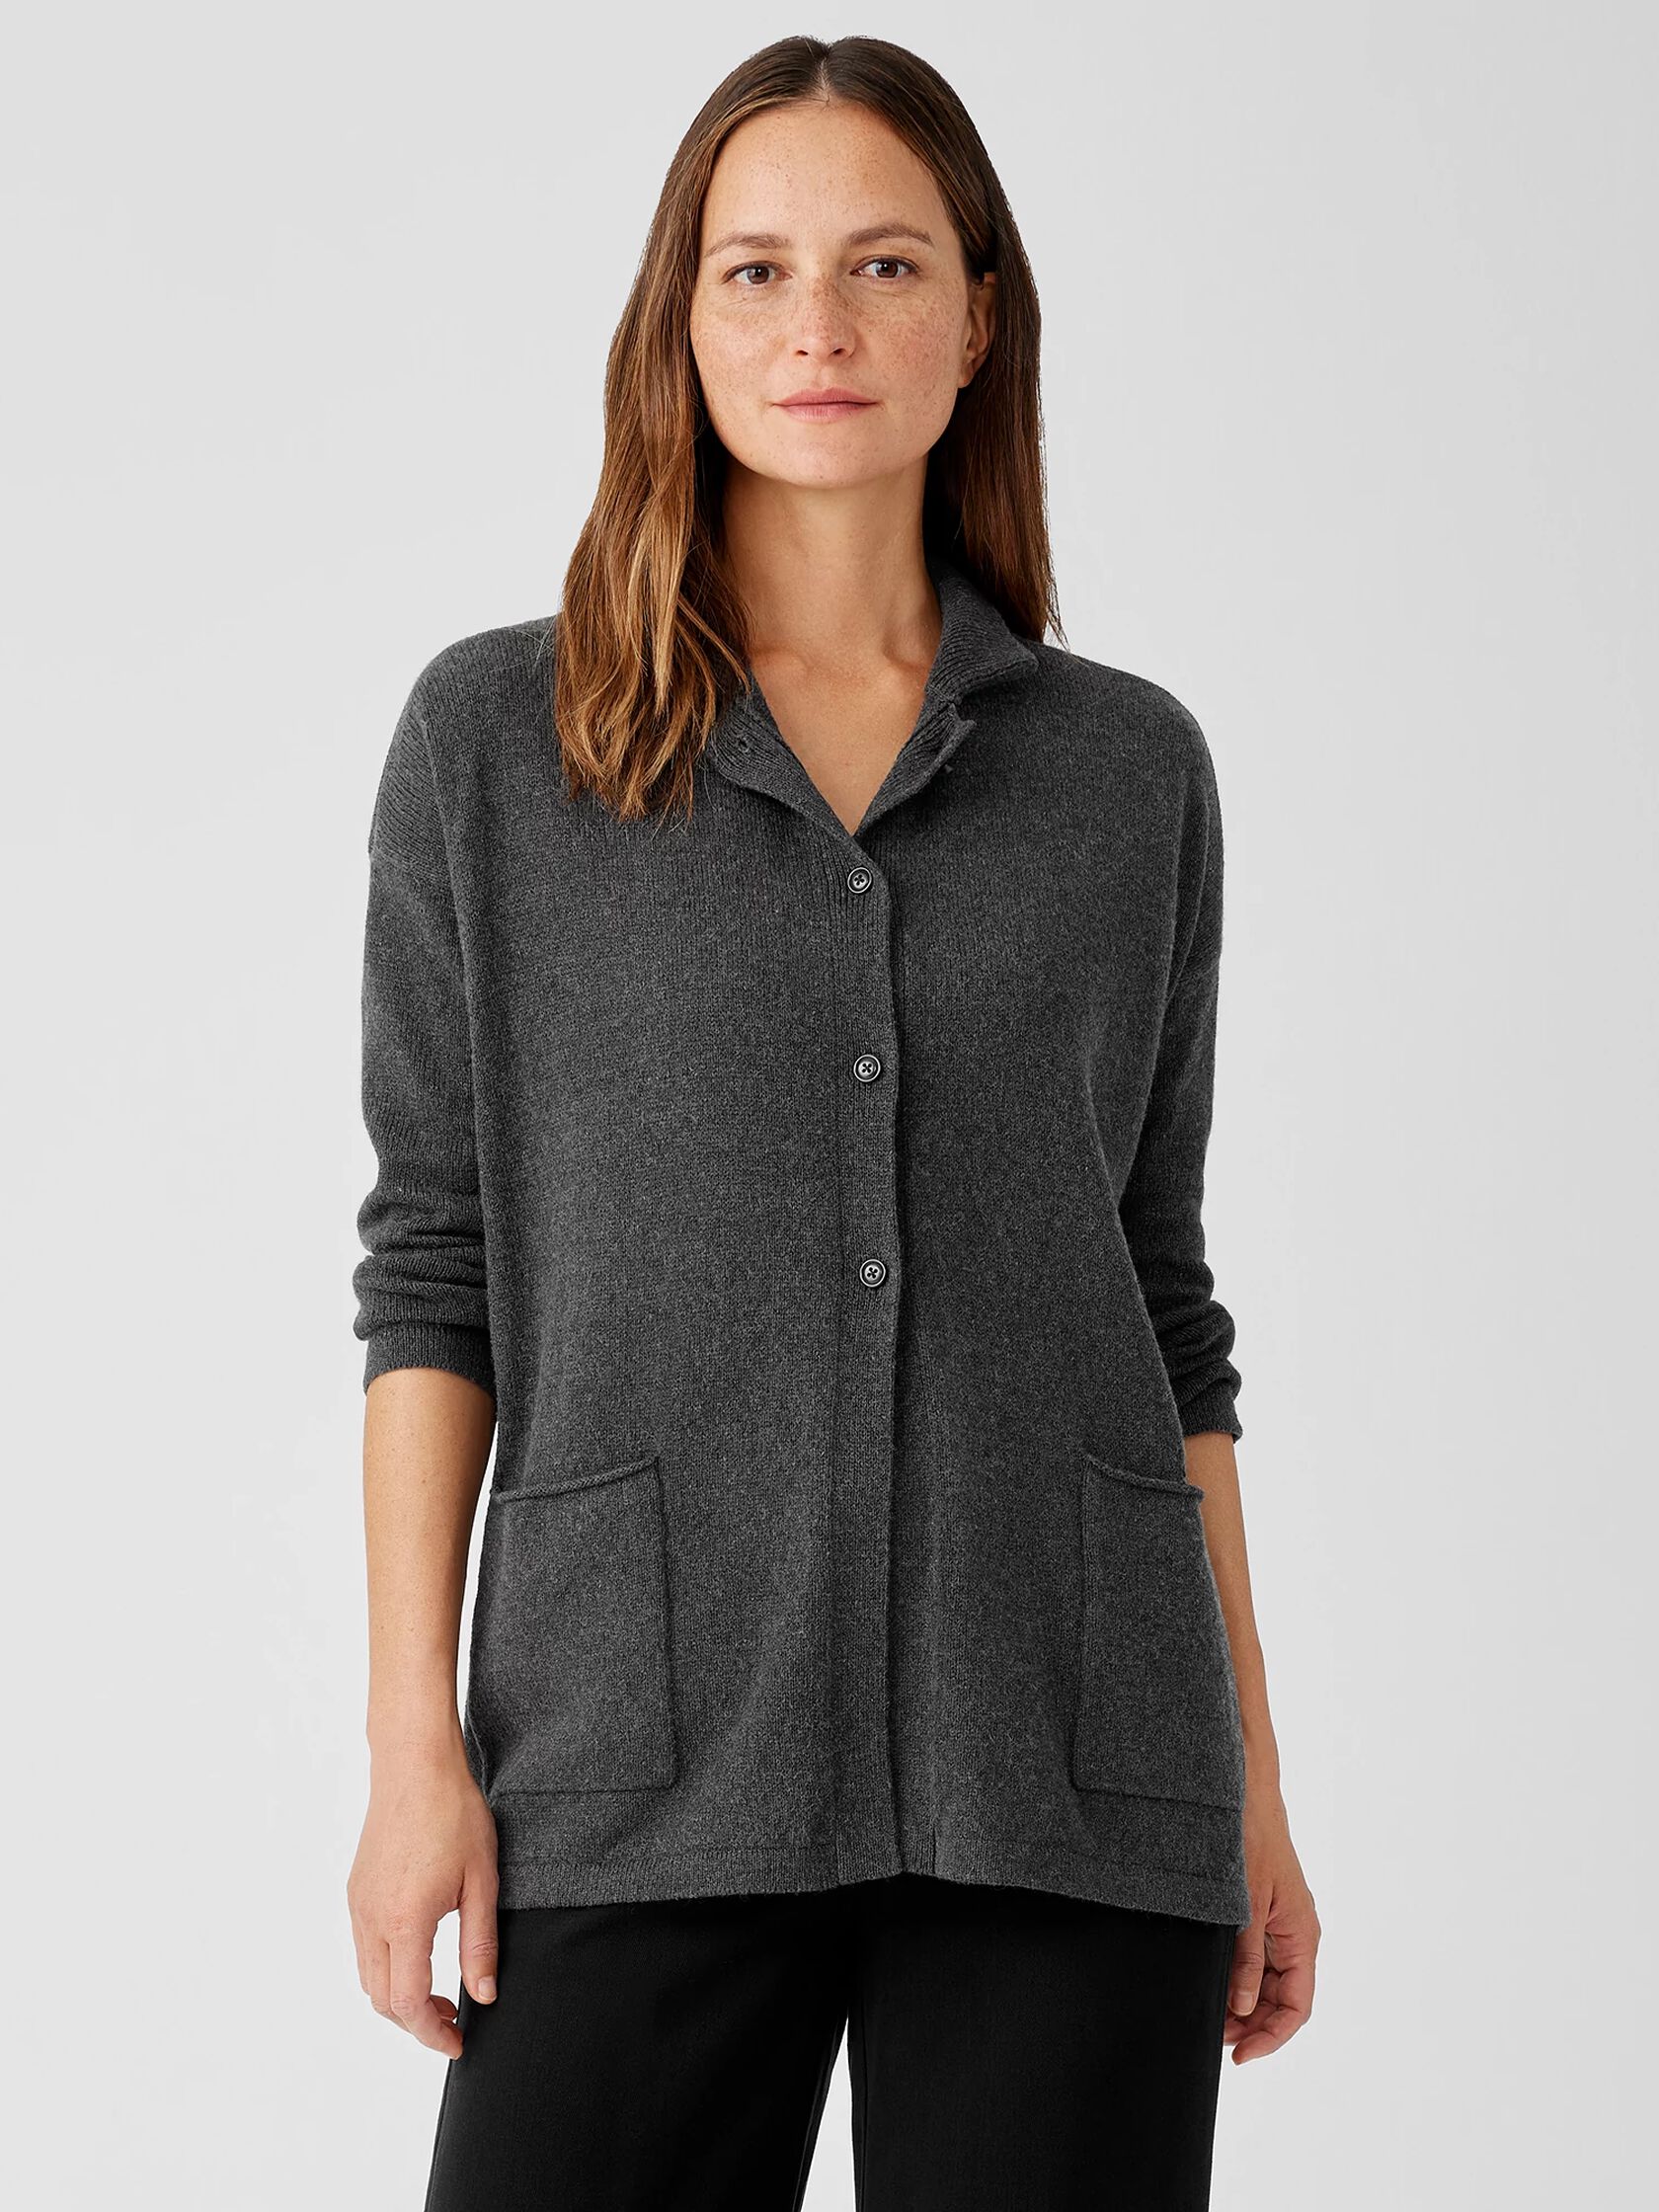 Cotton and Recycled Cashmere Cardigan